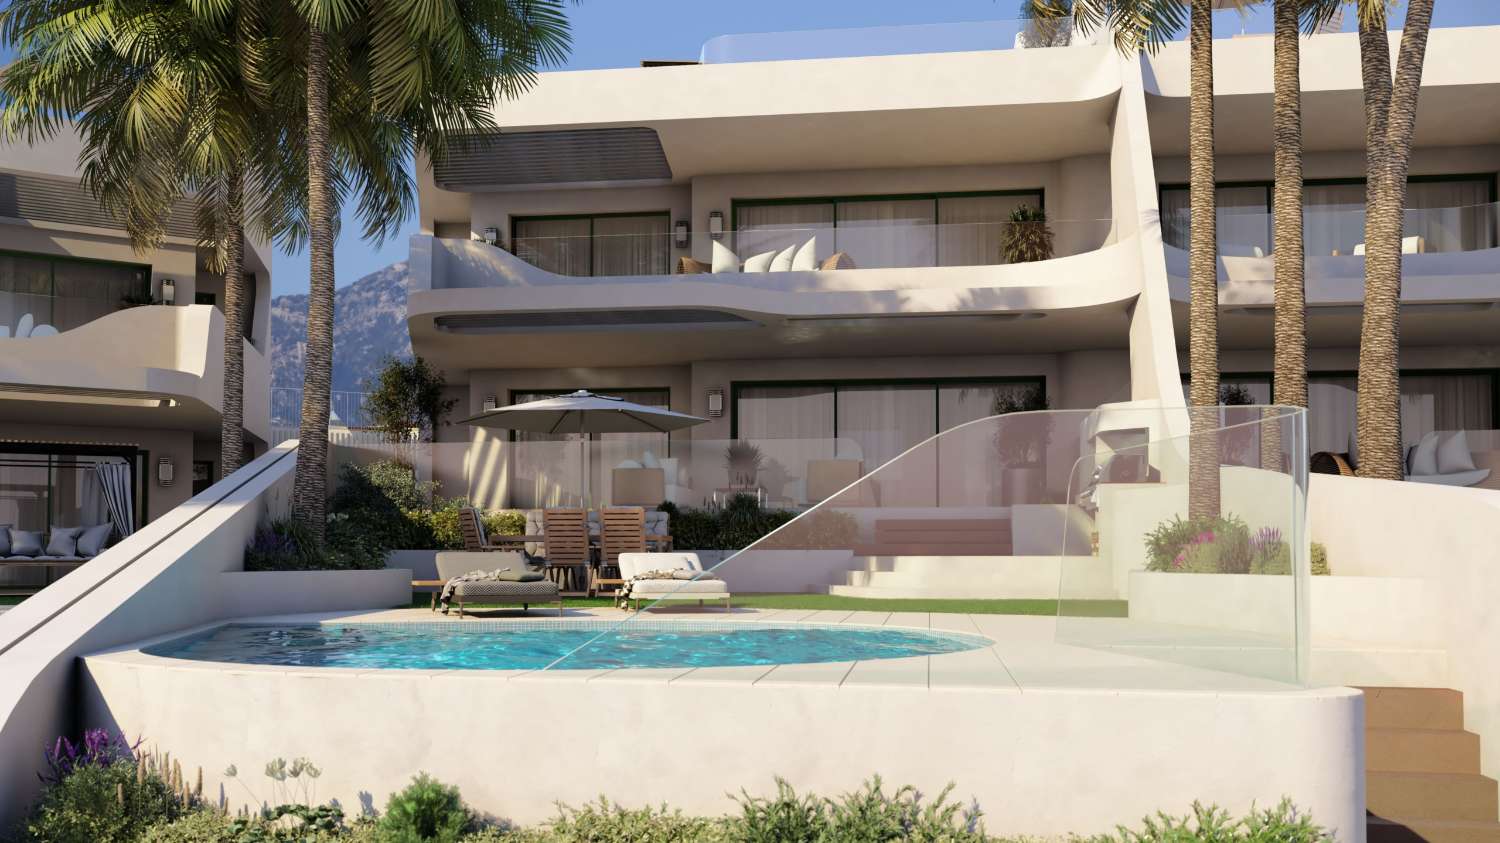 New Construction Homes in Marbella, Cabopino. Only 8 units. They all have a private pool.